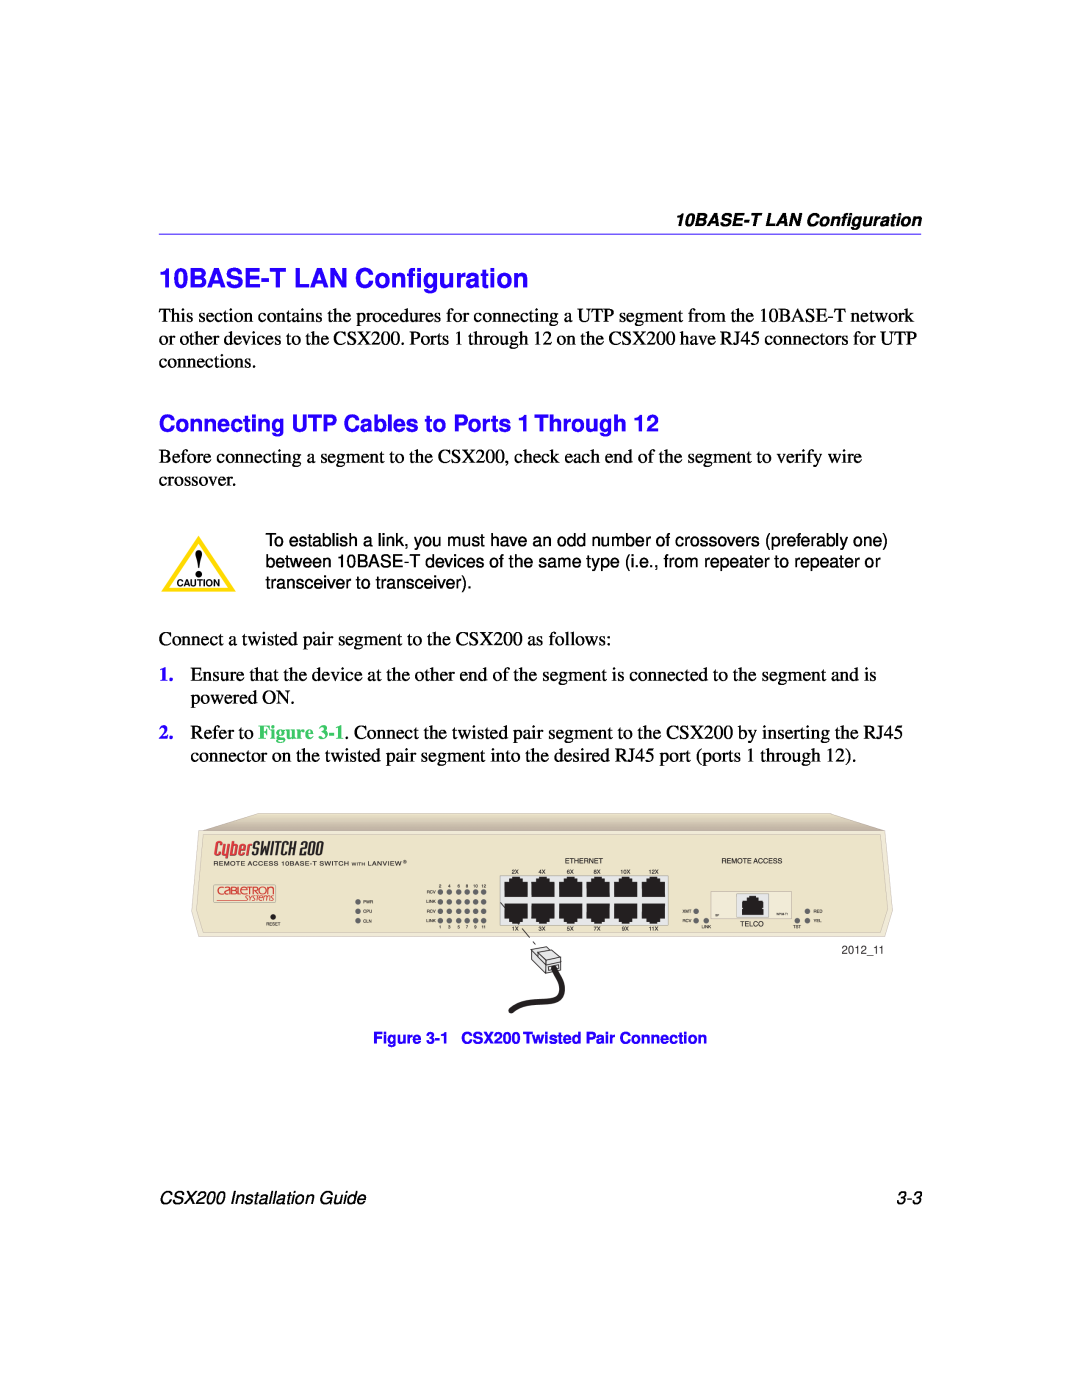 Cabletron Systems CSX200 manual 10BASE-T LAN Conﬁguration, Connecting UTP Cables to Ports 1 Through 